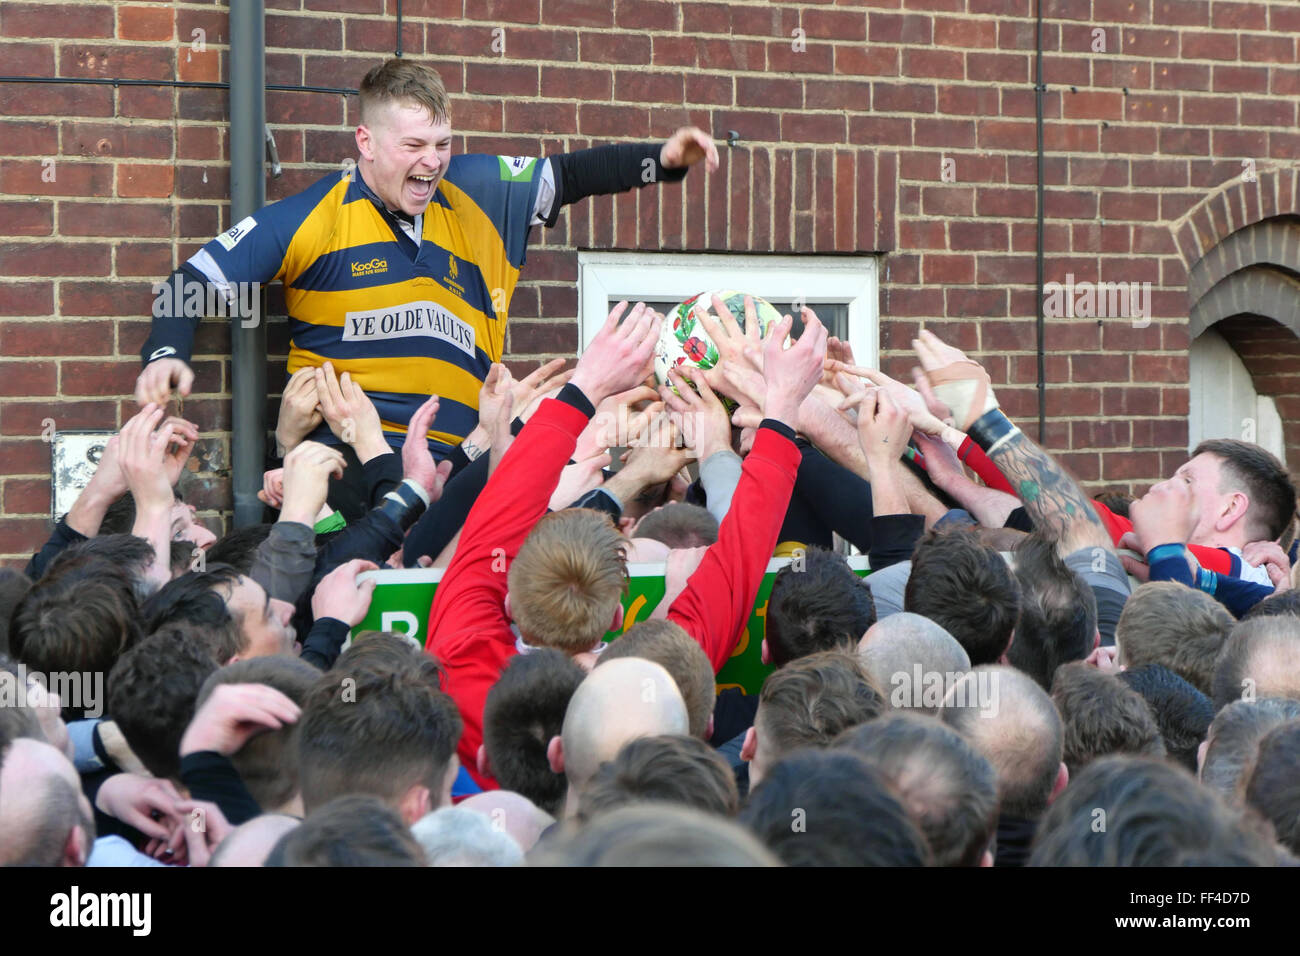 Ashbourne, Derbyshire, UK. 10th February, 2016. Ash Wednesday football match witch is the second day of the Royal Shrovetide Football match in Ashbourne, Derbyshire 2016 The Royal Shrovetide Football features the unconventional football game that is played over two eight hour periods on shrovetide Tuesday & Ash Wednesday. The goal posts 3 miles apart in the river which separated the Northern & Southern half of the Derbyshire town. Credit:  Doug Blane/Alamy Live News Peak District National Park Stock Photo